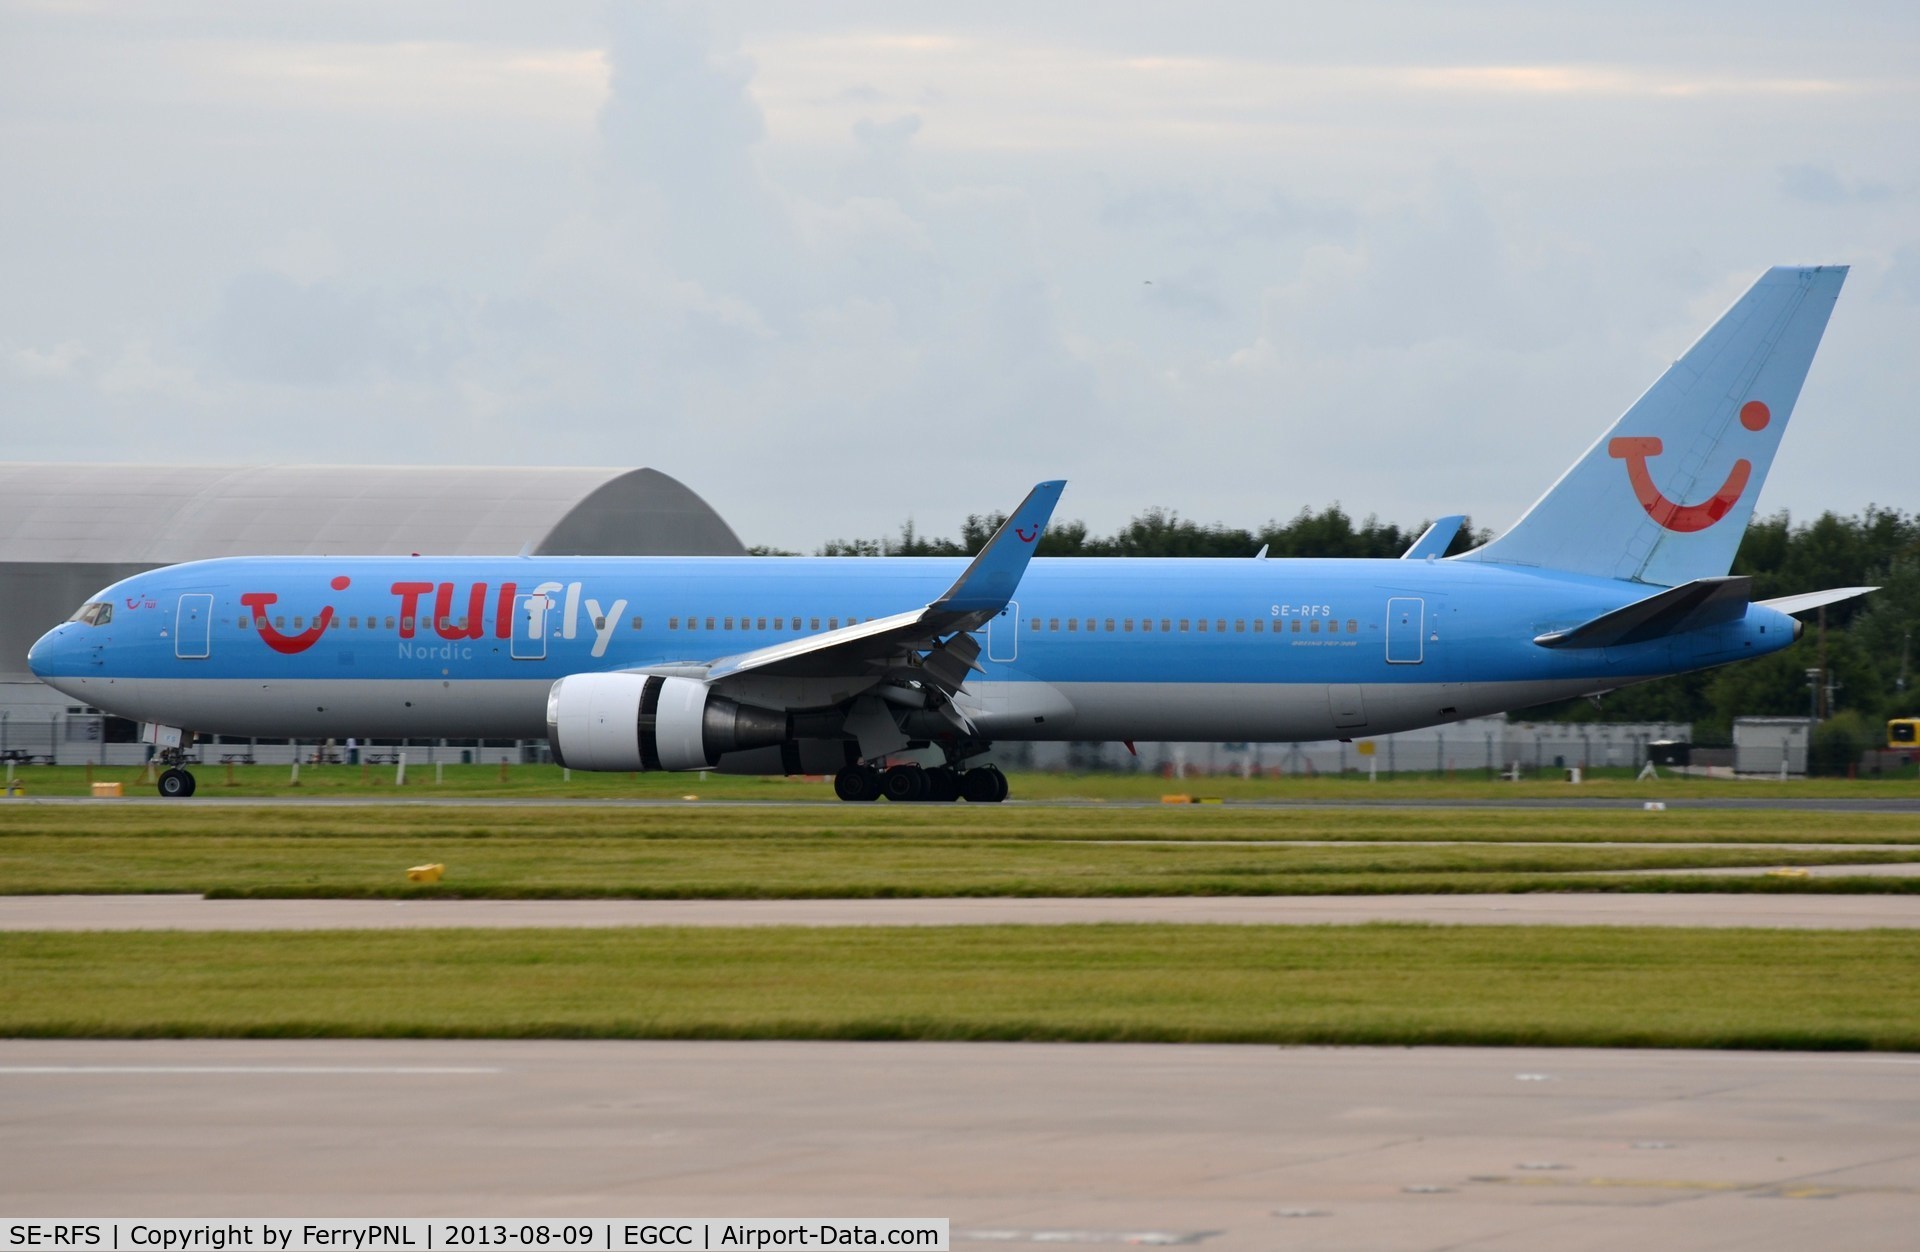 SE-RFS, 1996 Boeing 767-304/ER C/N 28040, Tui Nordic helping Thomson out with extra capacity.